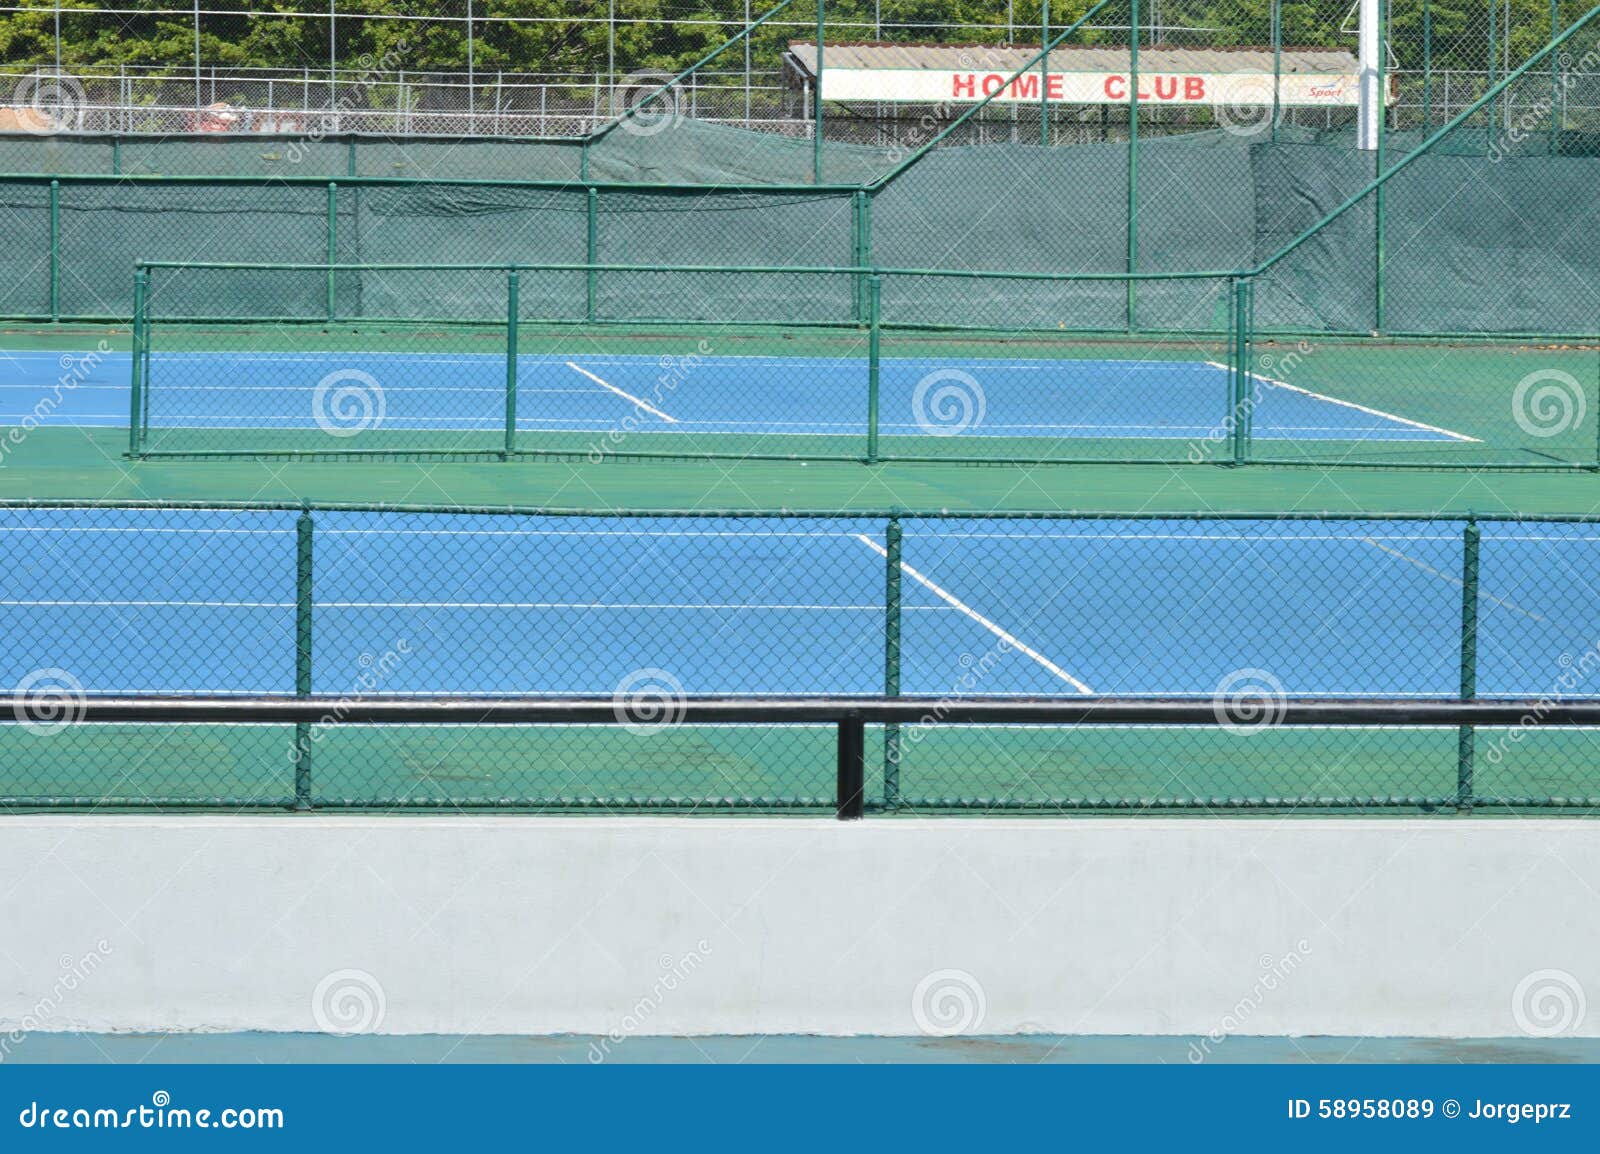 Two Tennis Courts In The Home Club Stock Image Image Of Green 3967